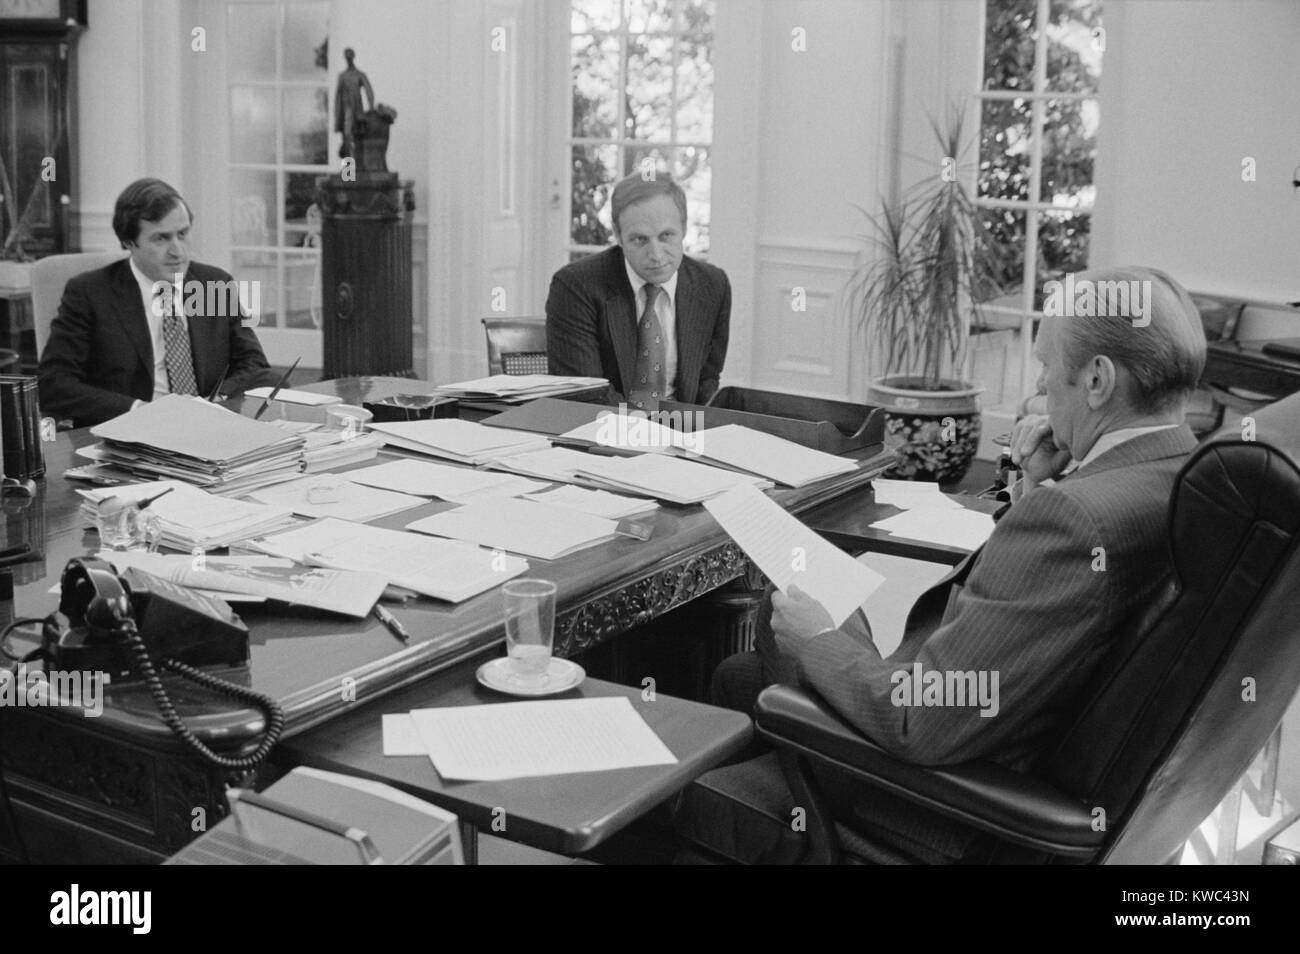 President Gerald Ford meeting with David Mathews(right) and Dick Cheney. Mathews was Secretary of HEW and Cheney was White House Chief of Staff. Sept. 22, 1976. (BSLOC 2015 14 60) Stock Photo